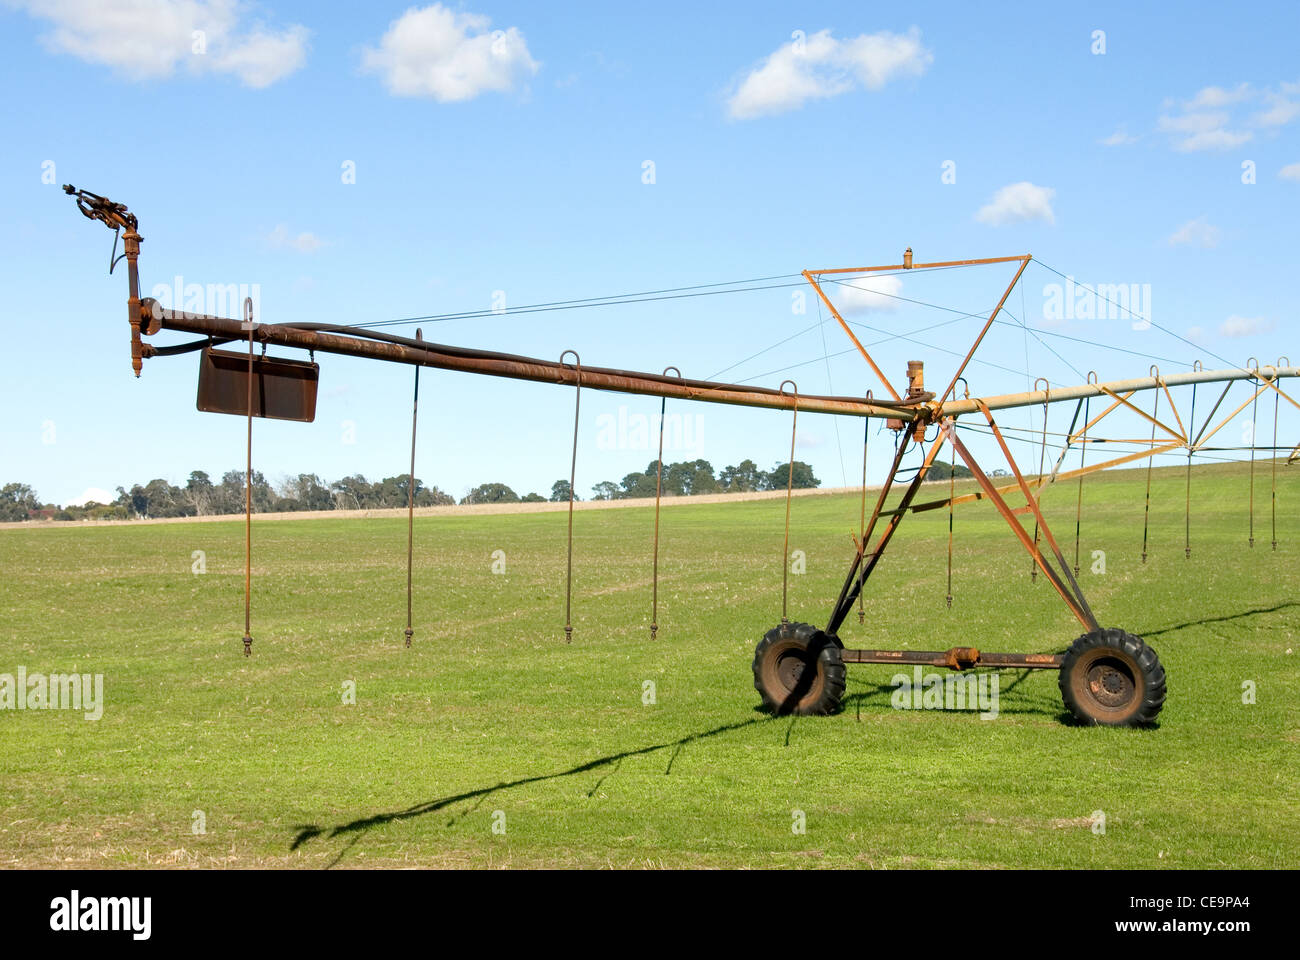 Irrigation equipment on a farm in the Southern Highlands of New South Wales, Australia Stock Photo